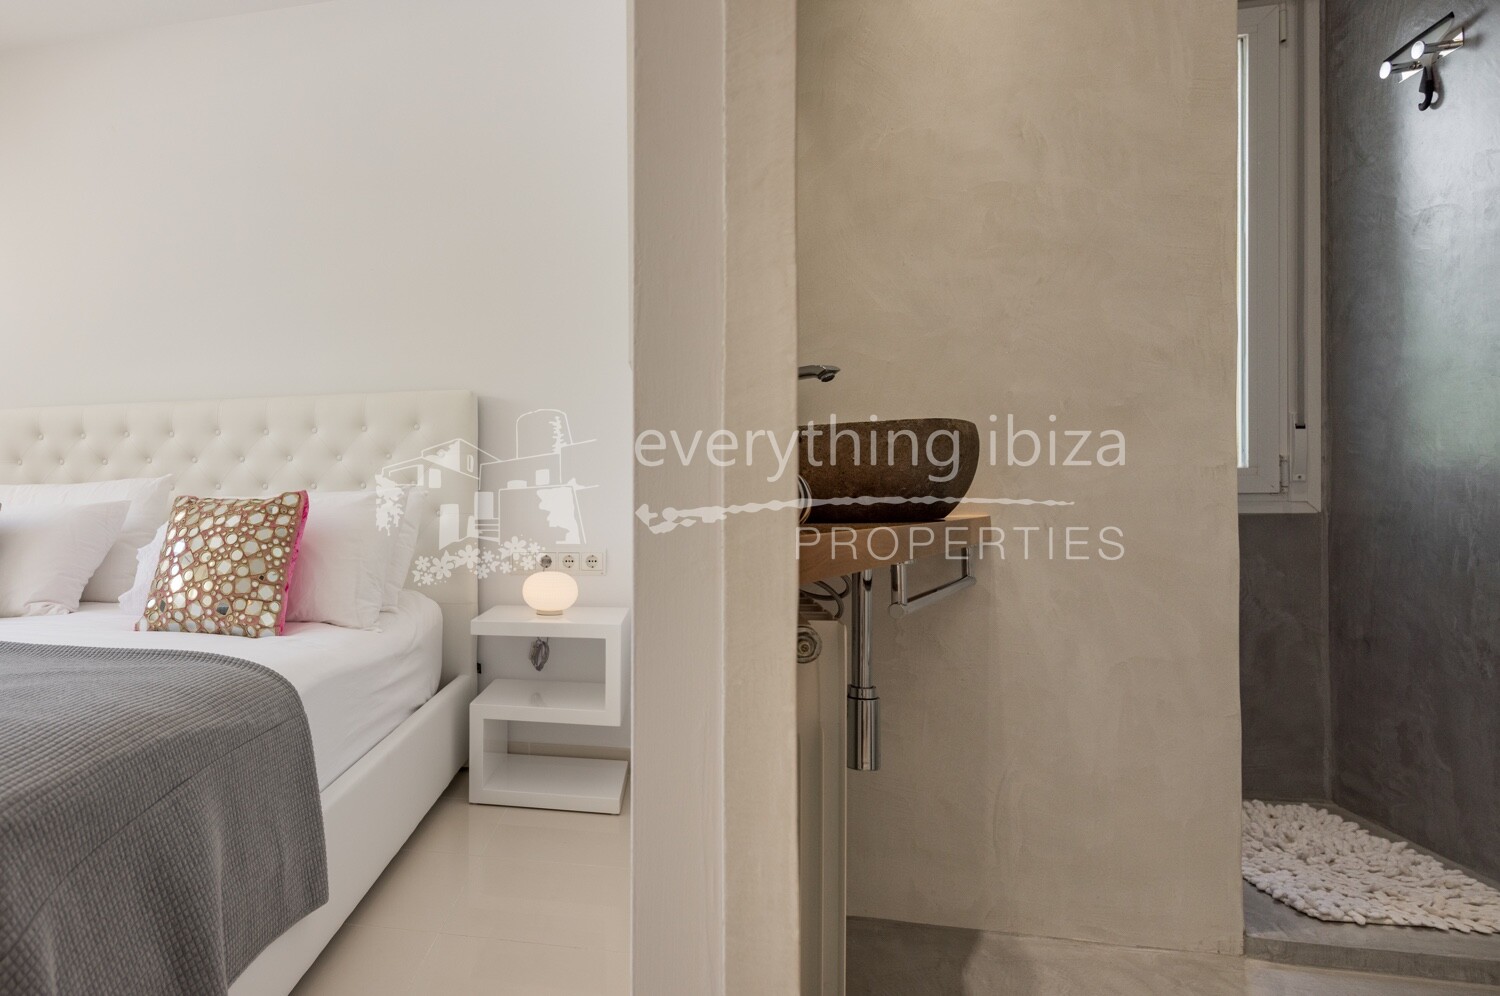 Cosmopolitan Modern Villa with Super Views & Tourist License, ref. 1512, for sale in Ibiza by everything ibiza Properties